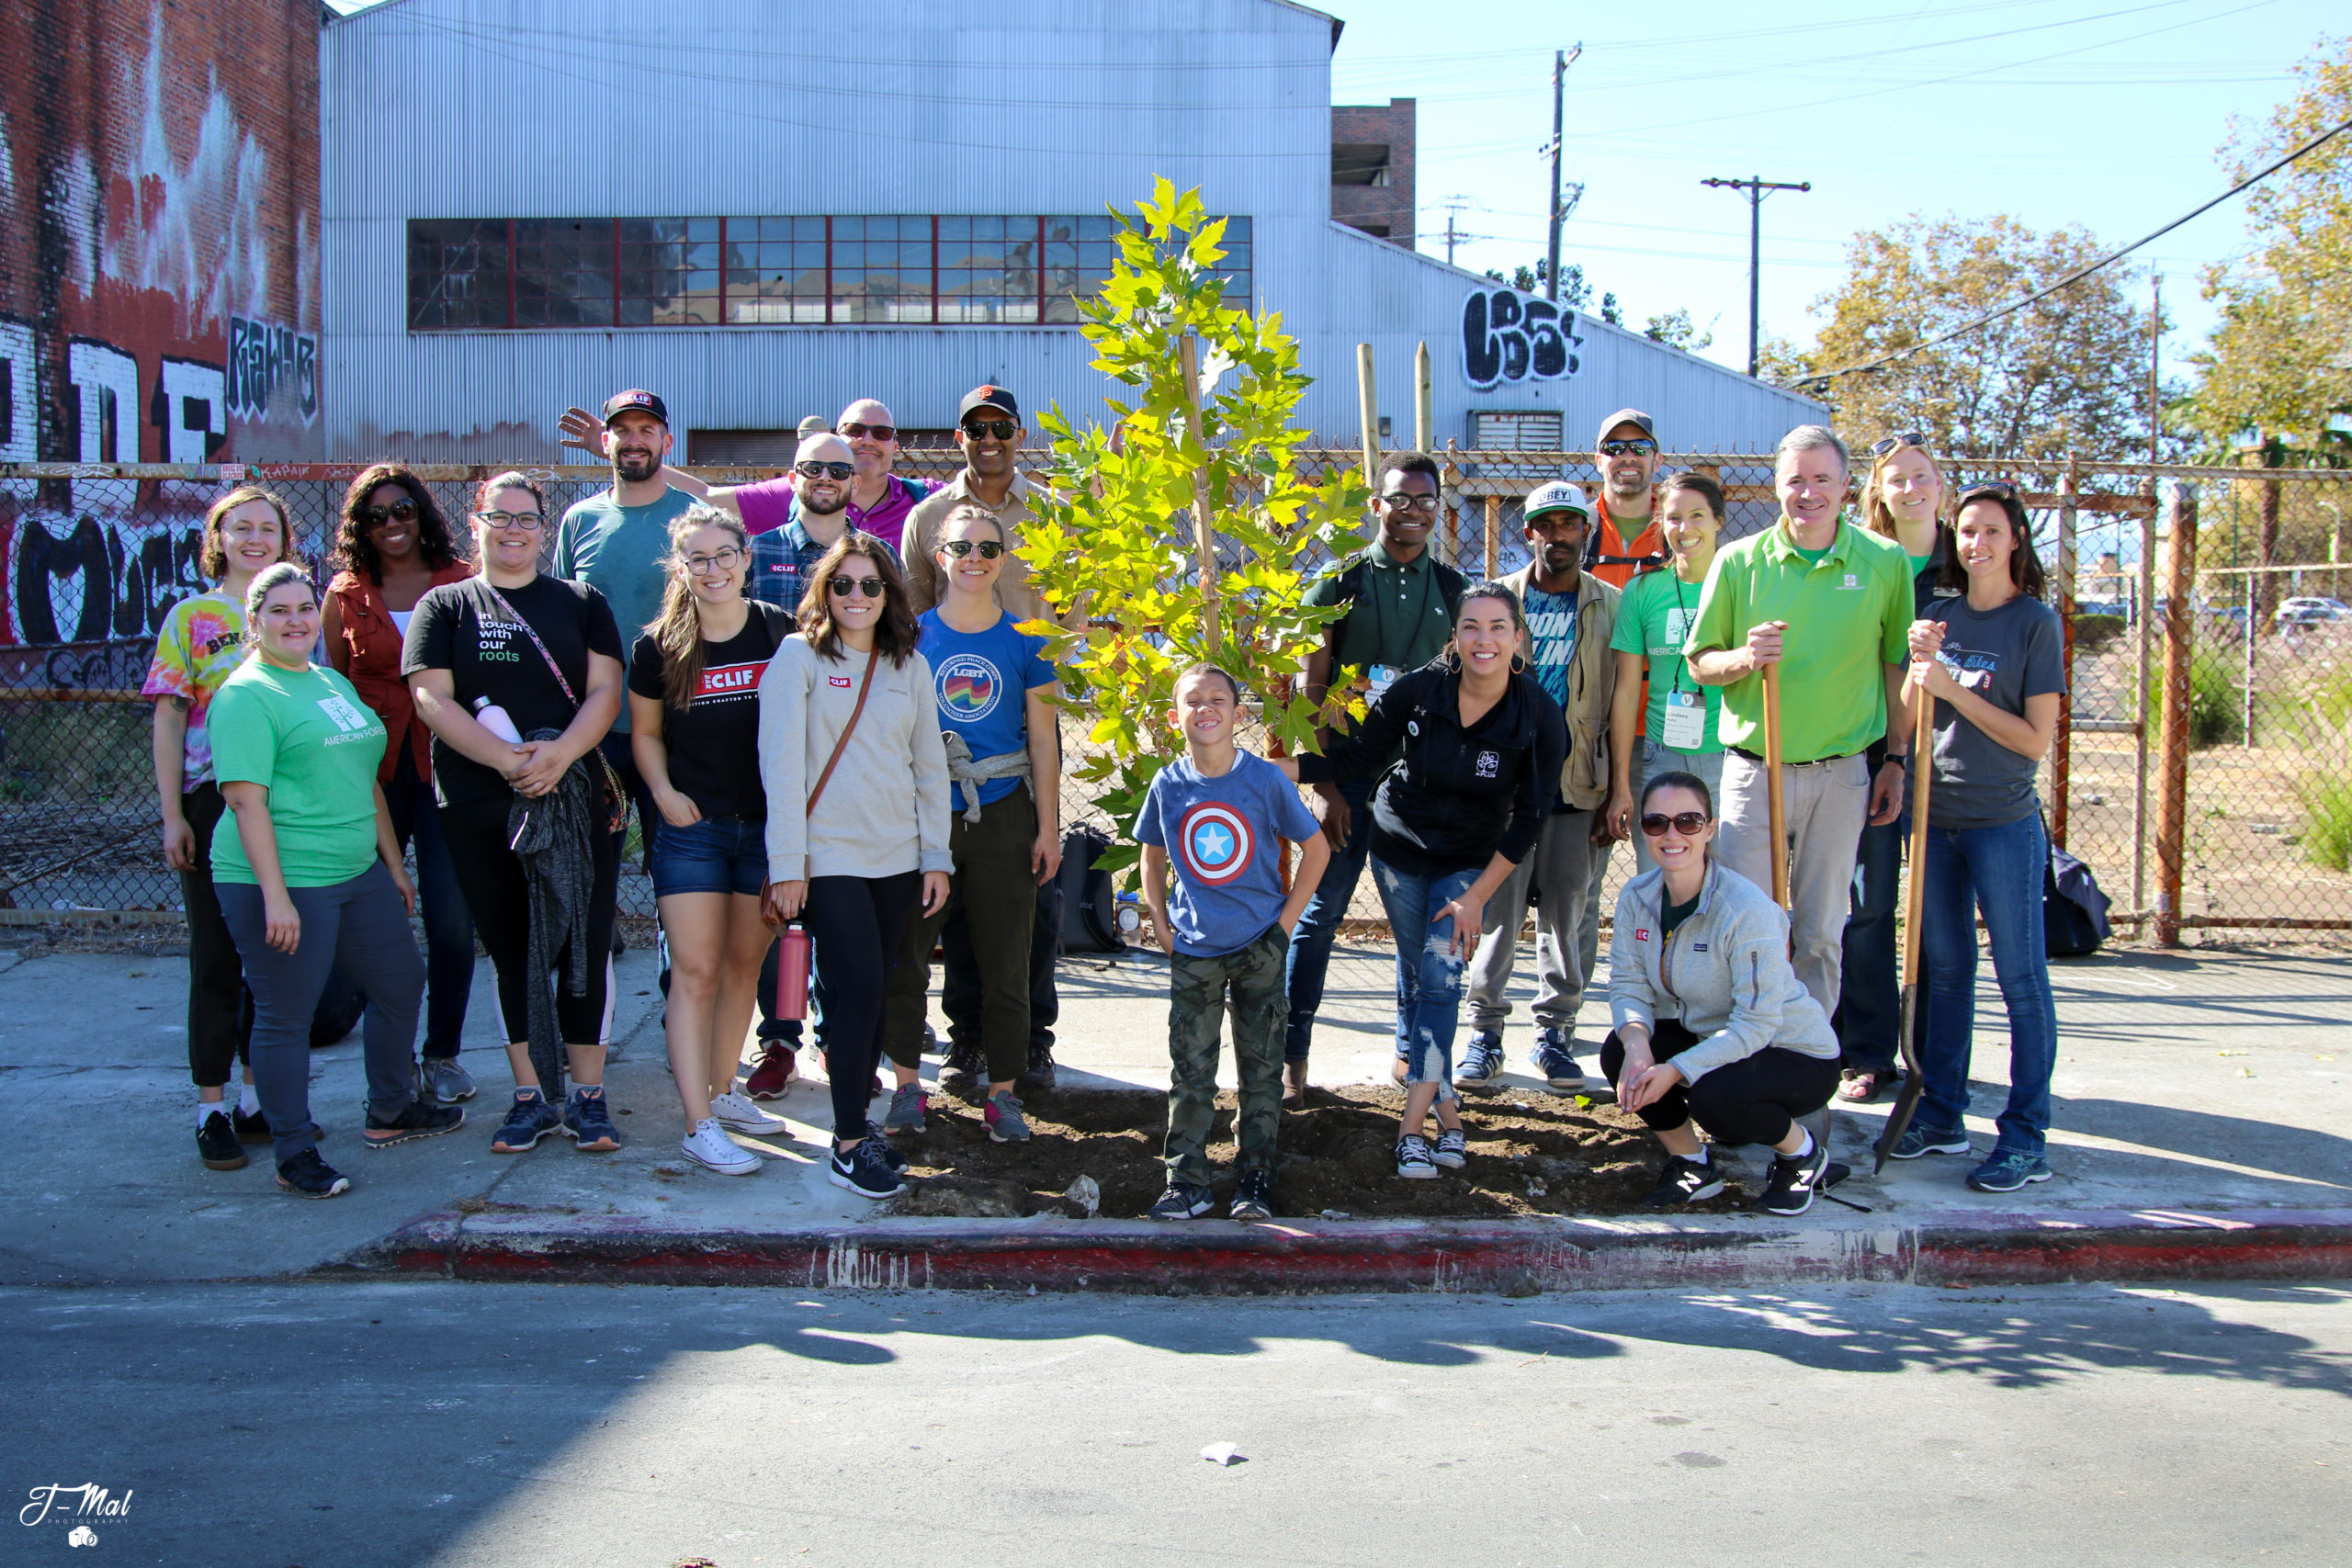 American Forests worked with partners and conference attendees to plant 20 trees in the city of Oakland, Calif. during the 2019 VERGE Carbon conference.